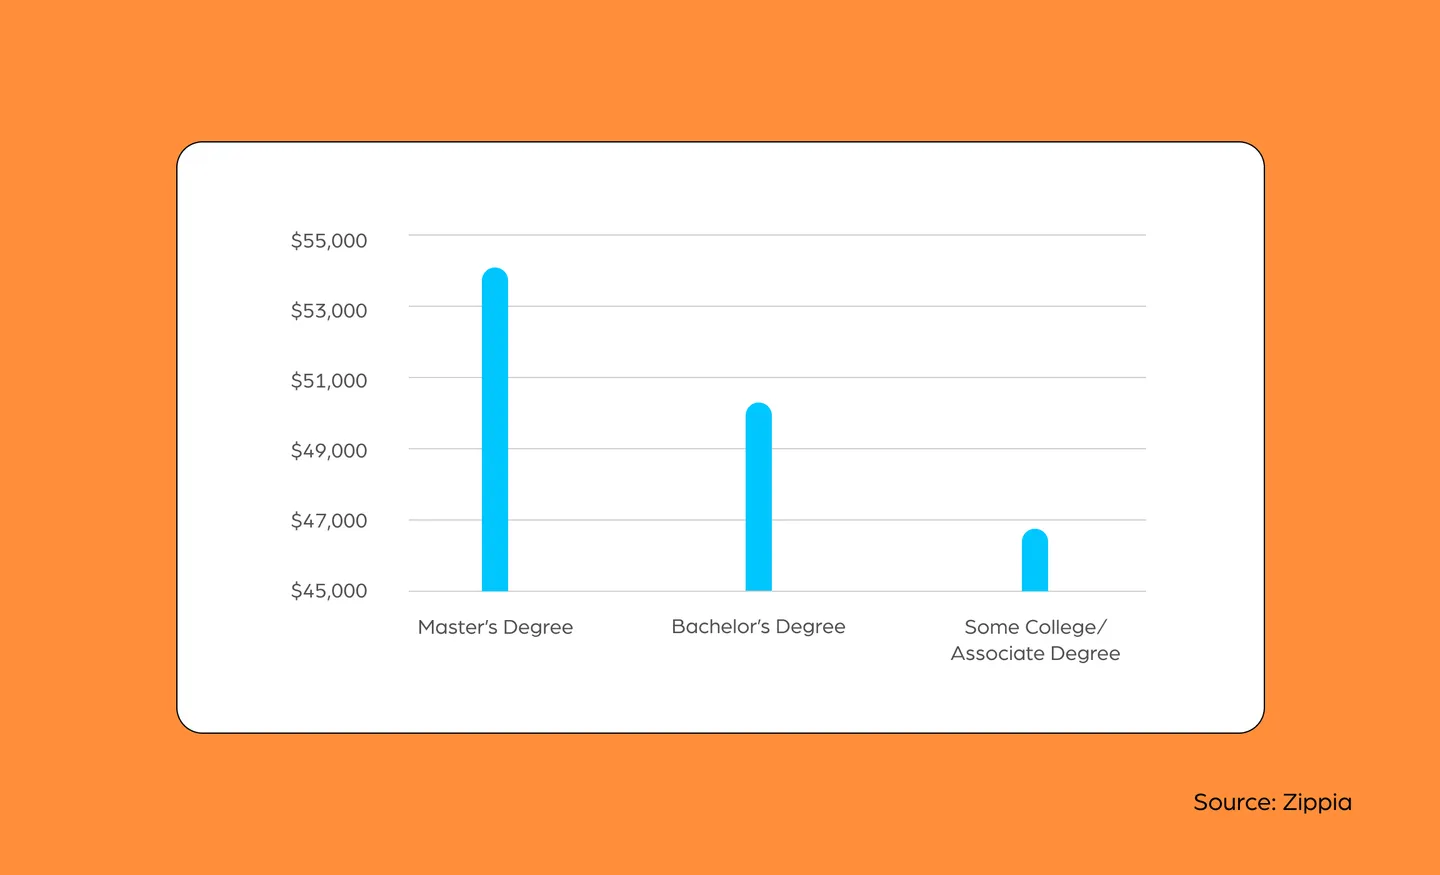 Graphic designer wage gap by education from Zippia